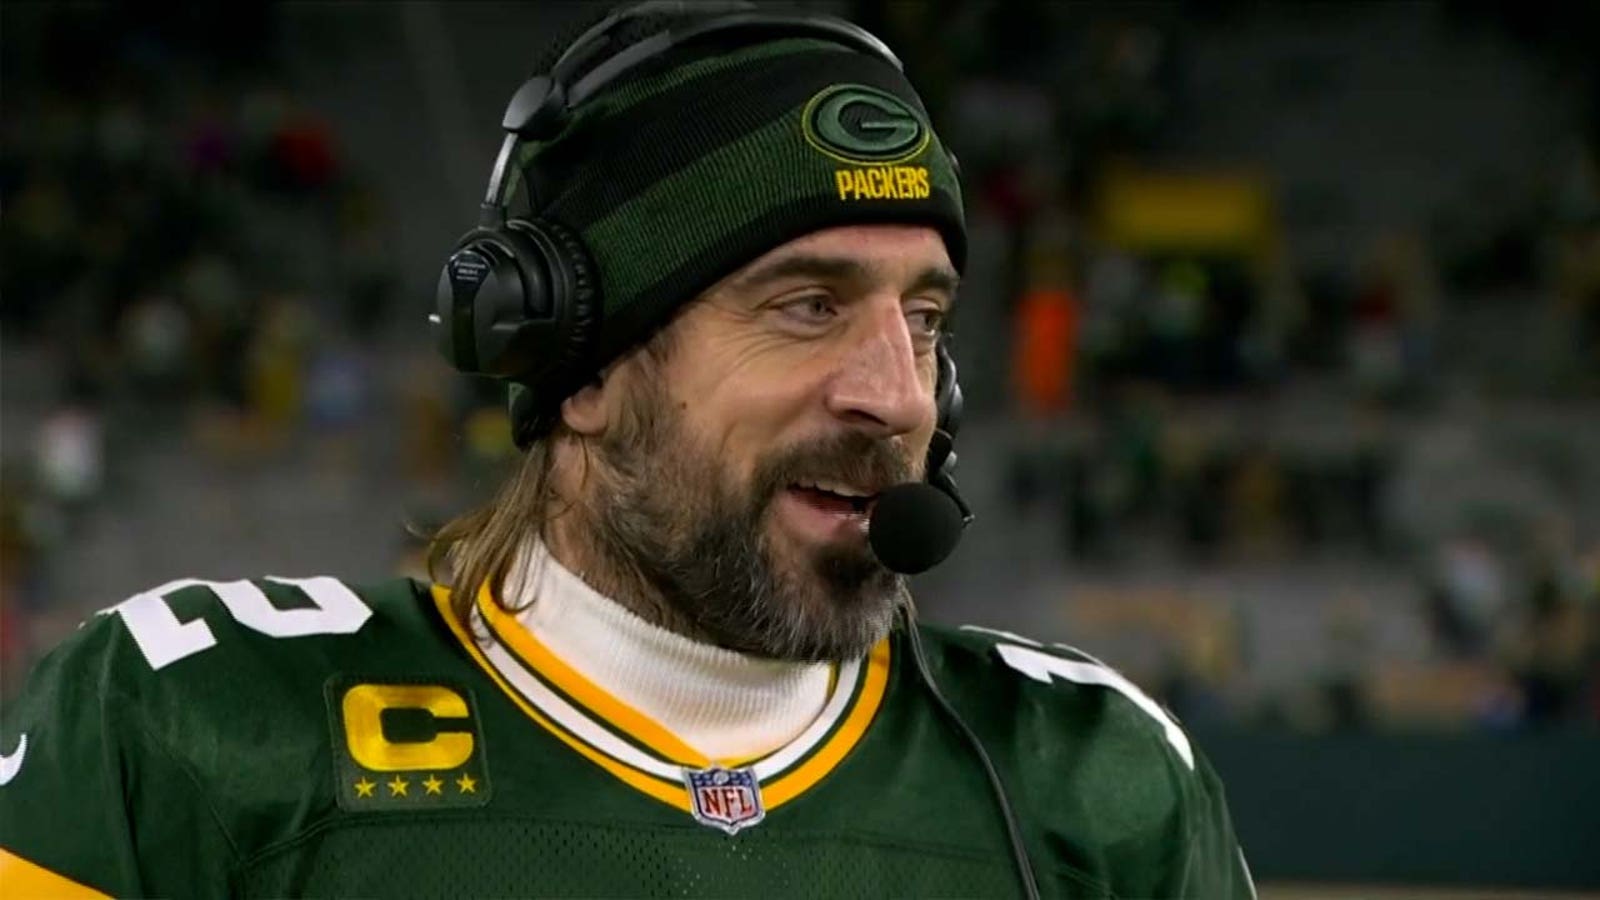 'I'm not missing any time' — Aaron Rodgers speaks with Erin Andrews on his toe injury following win against Rams